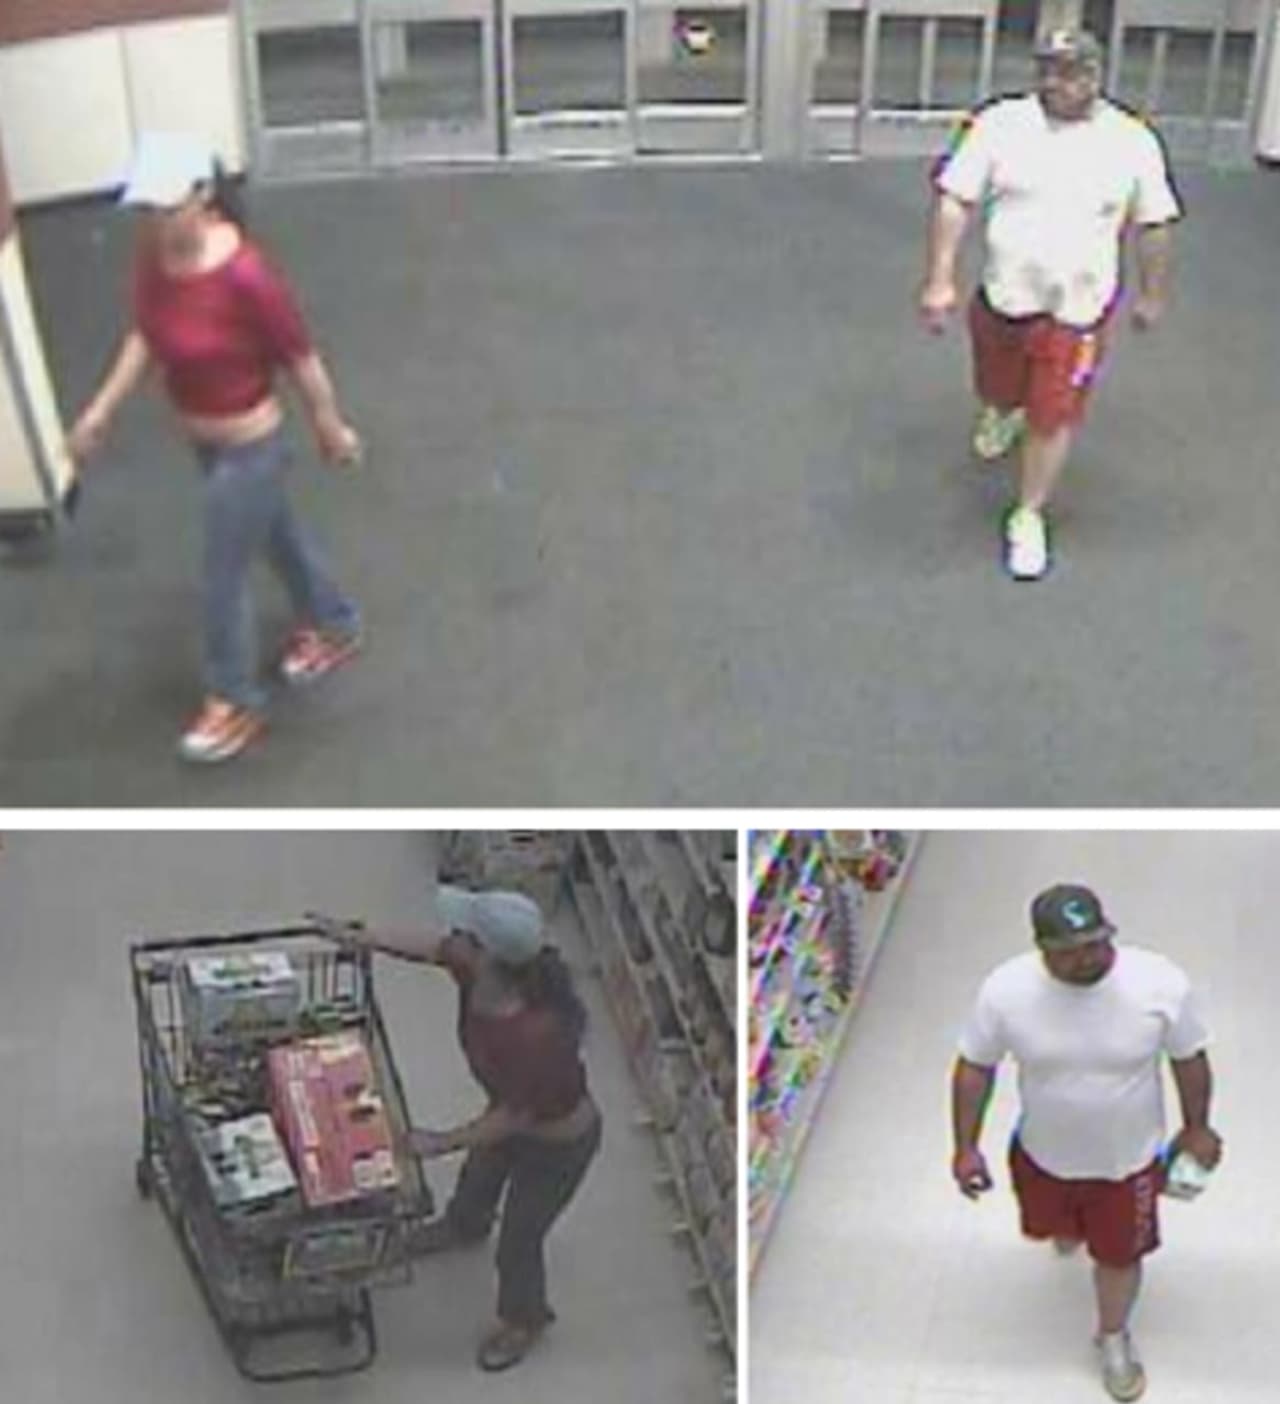 Police are on the lookout for a man and woman suspected of stealing items valued at $495 from Stop & Shop in Islandia (1730 Veterans Memorial Highway) on Friday, June 28 around 10:15 p.m.